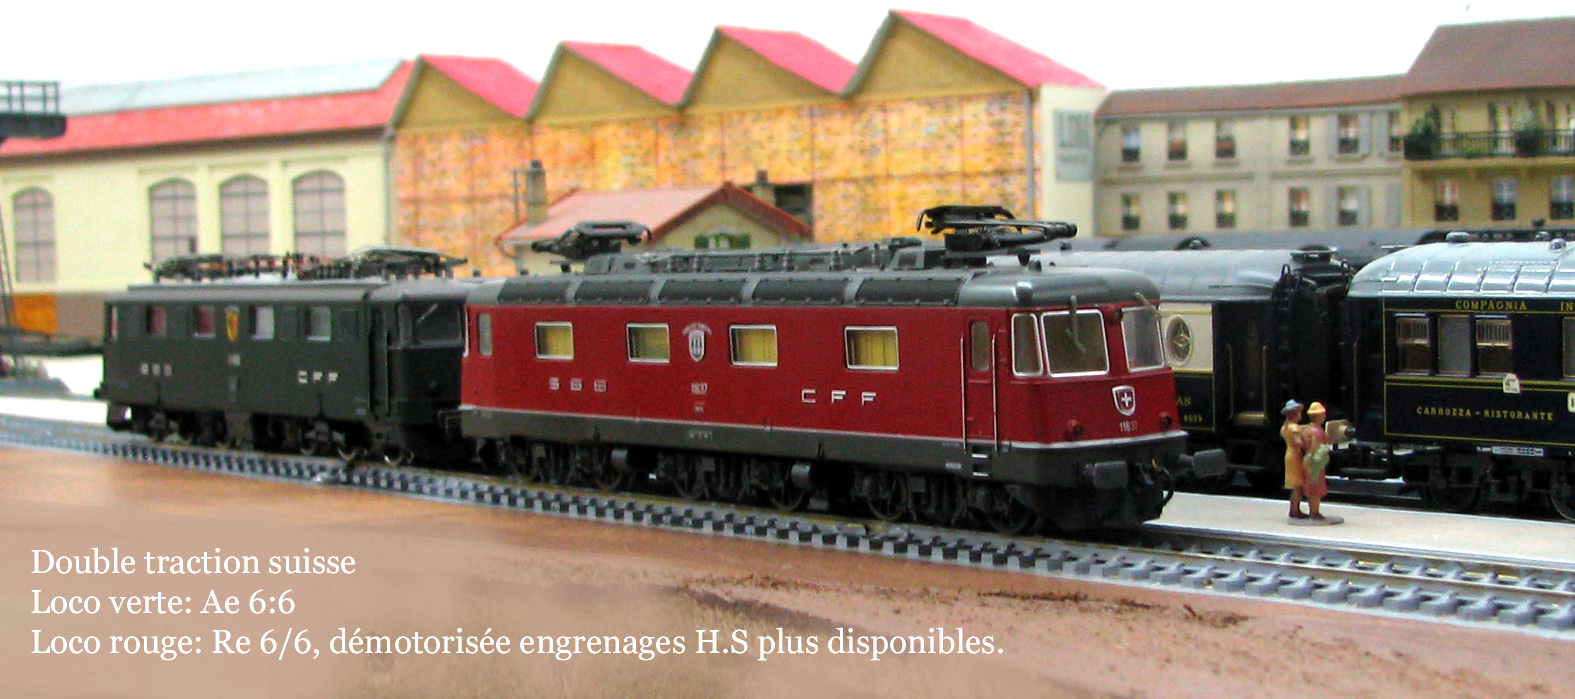 Double traction suisse 03 .jpg